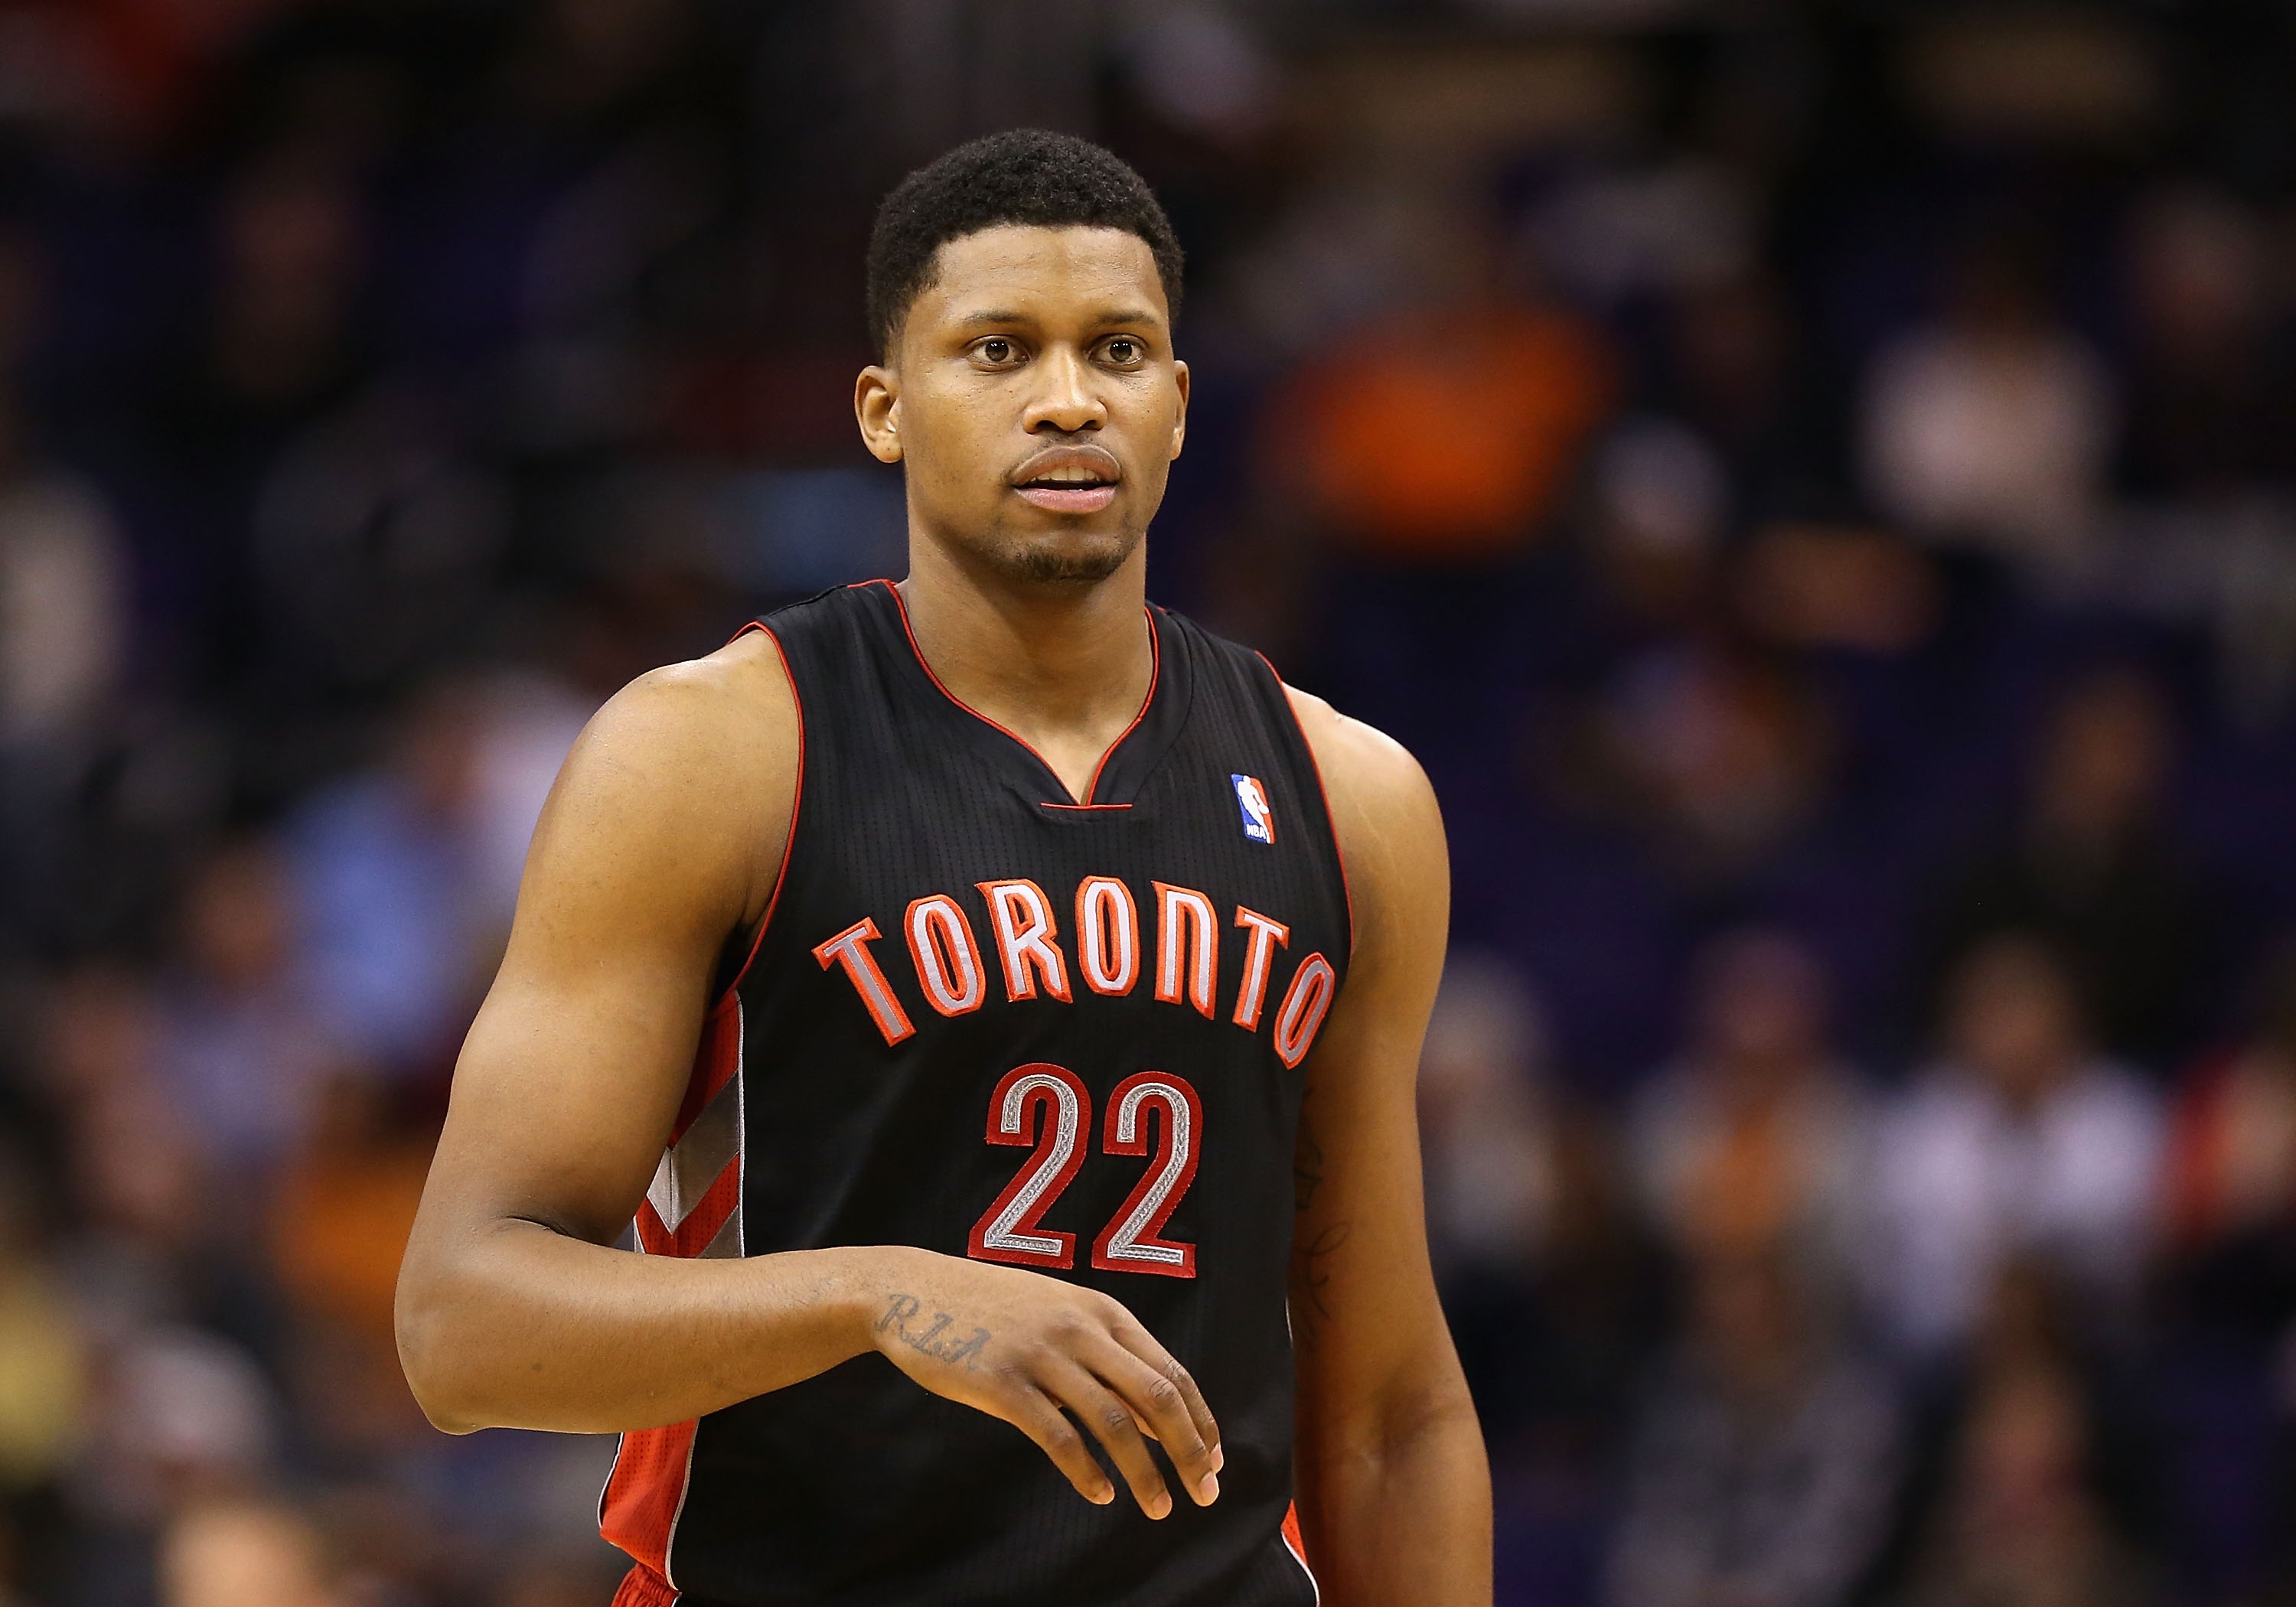 REPORT: Rudy Gay Has Been Traded To The Kings